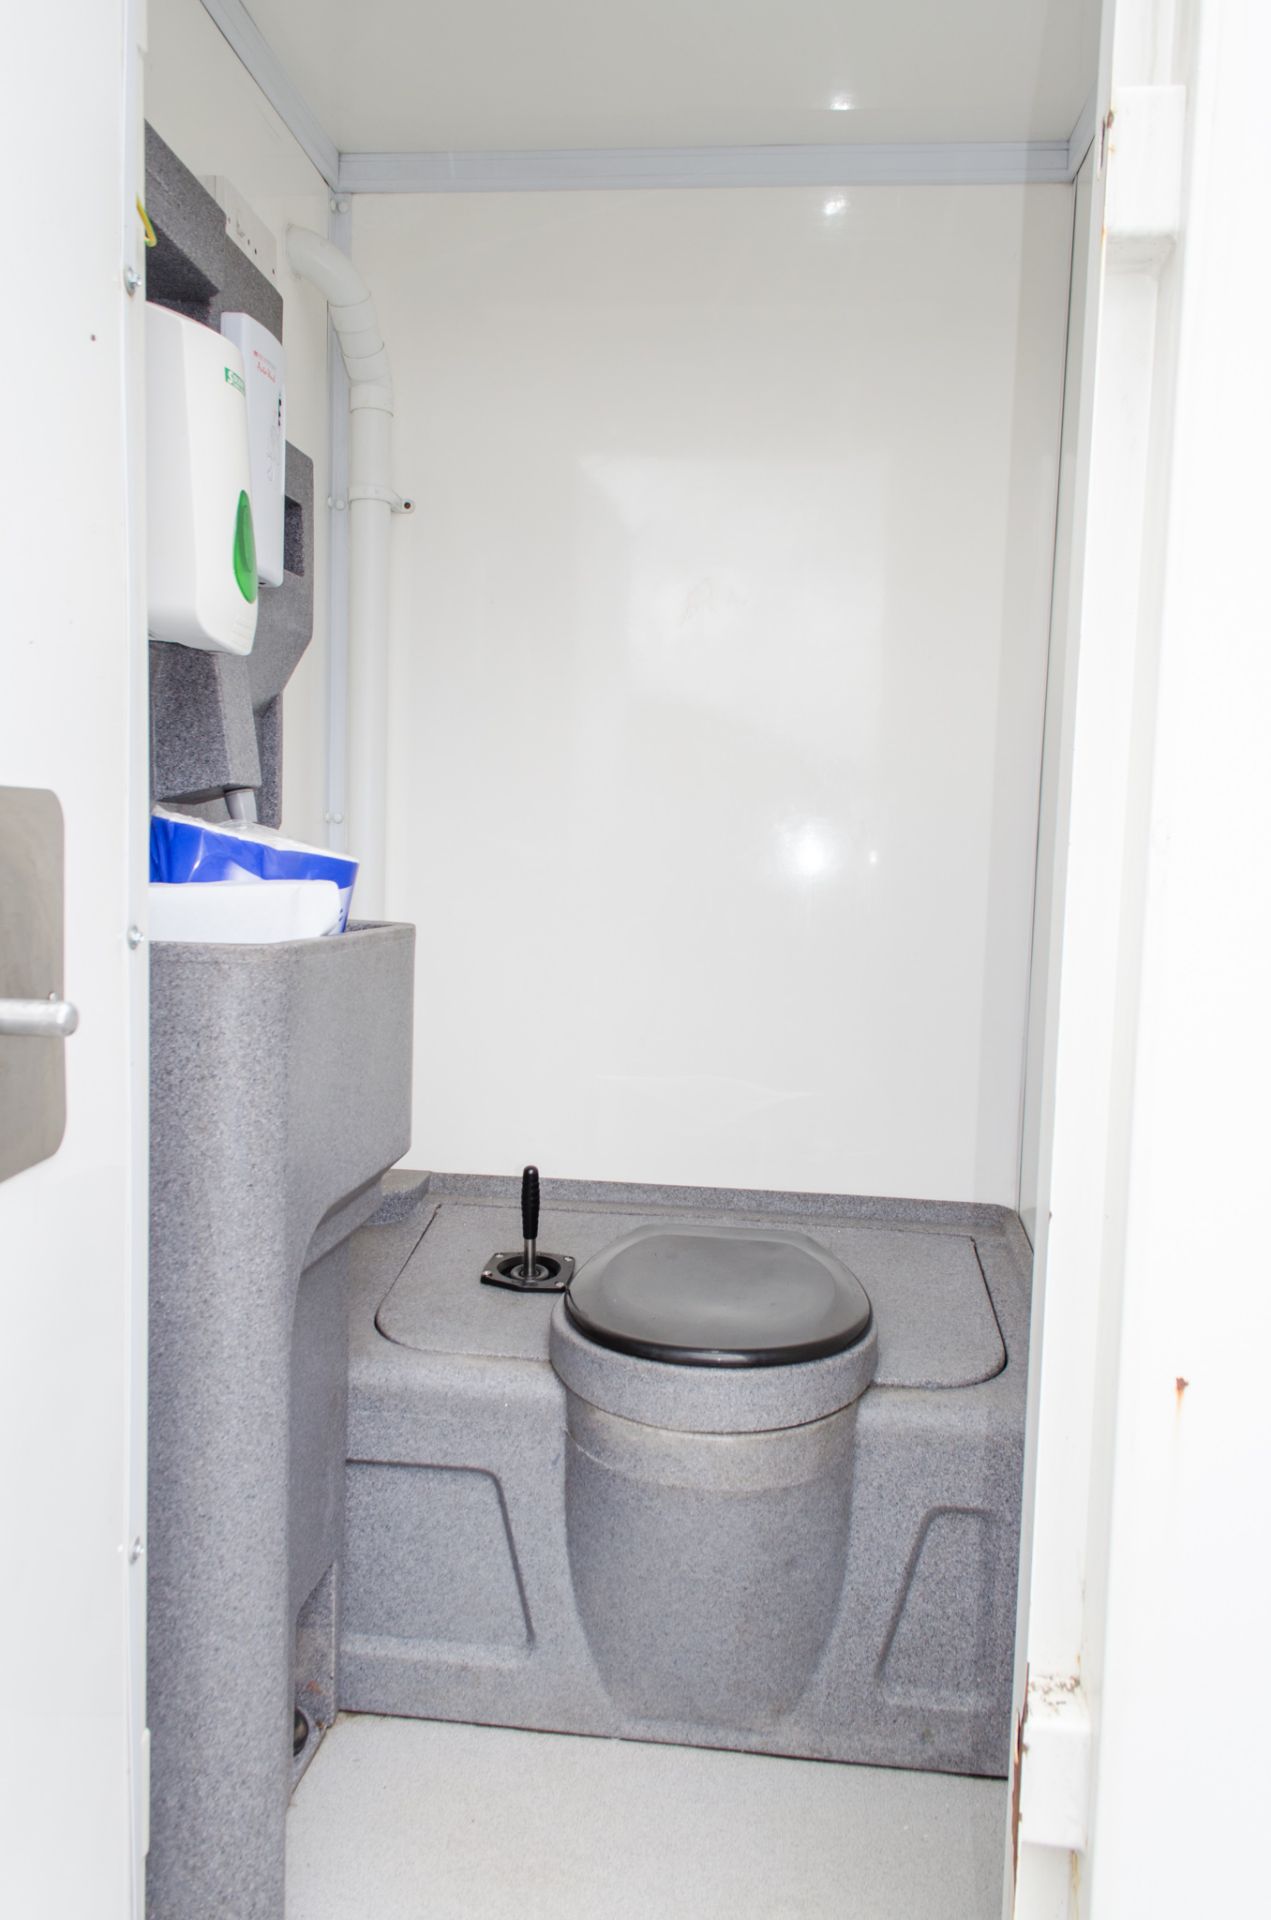 Boss Cabins 12 ft x 8 ft steel anti vandal mobile welfare unit Comprising of: Canteen, toilet & - Image 9 of 11